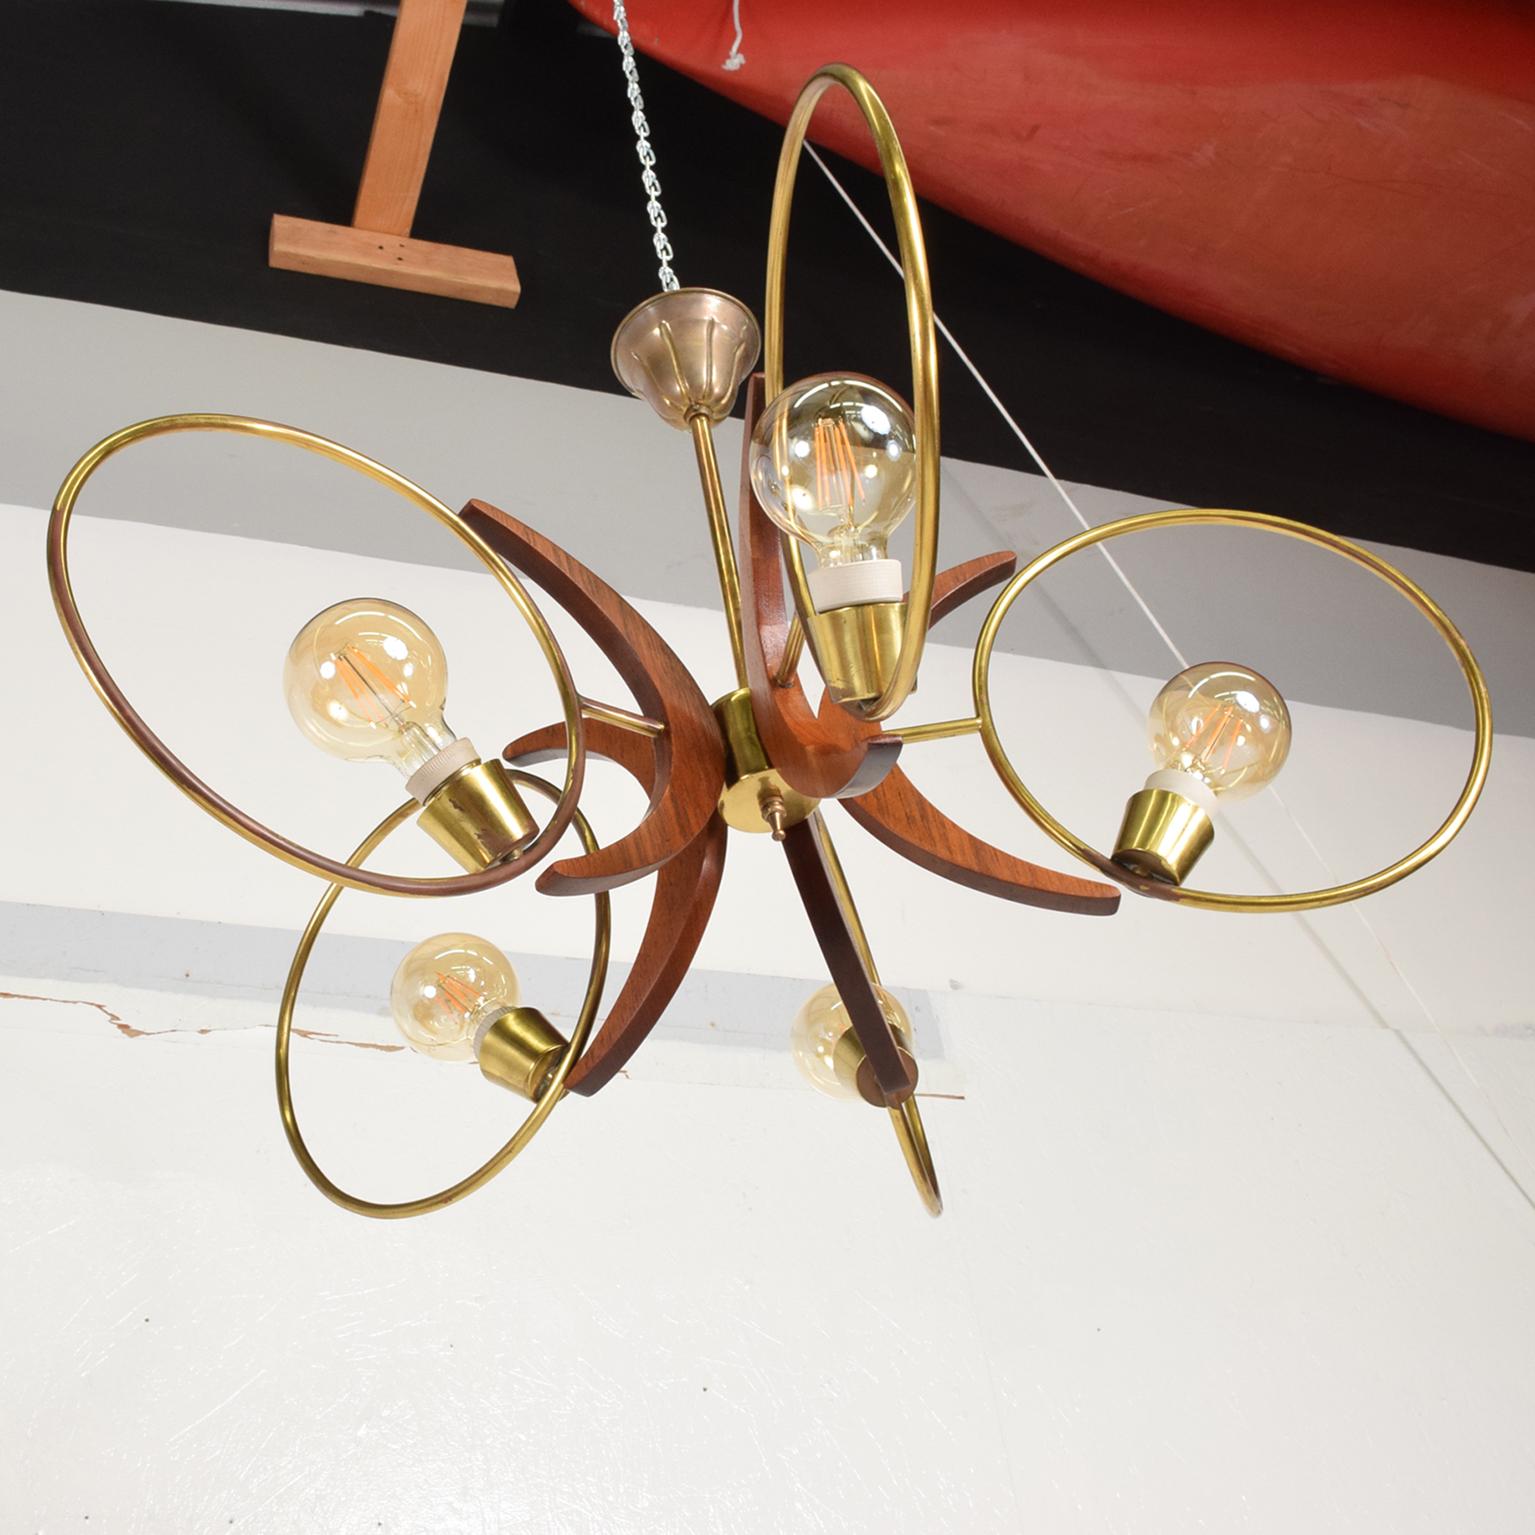 Midcentury Modern Sculptural Chandelier 5 Ring Brass Mahogany Mexico City 1960s For Sale 1